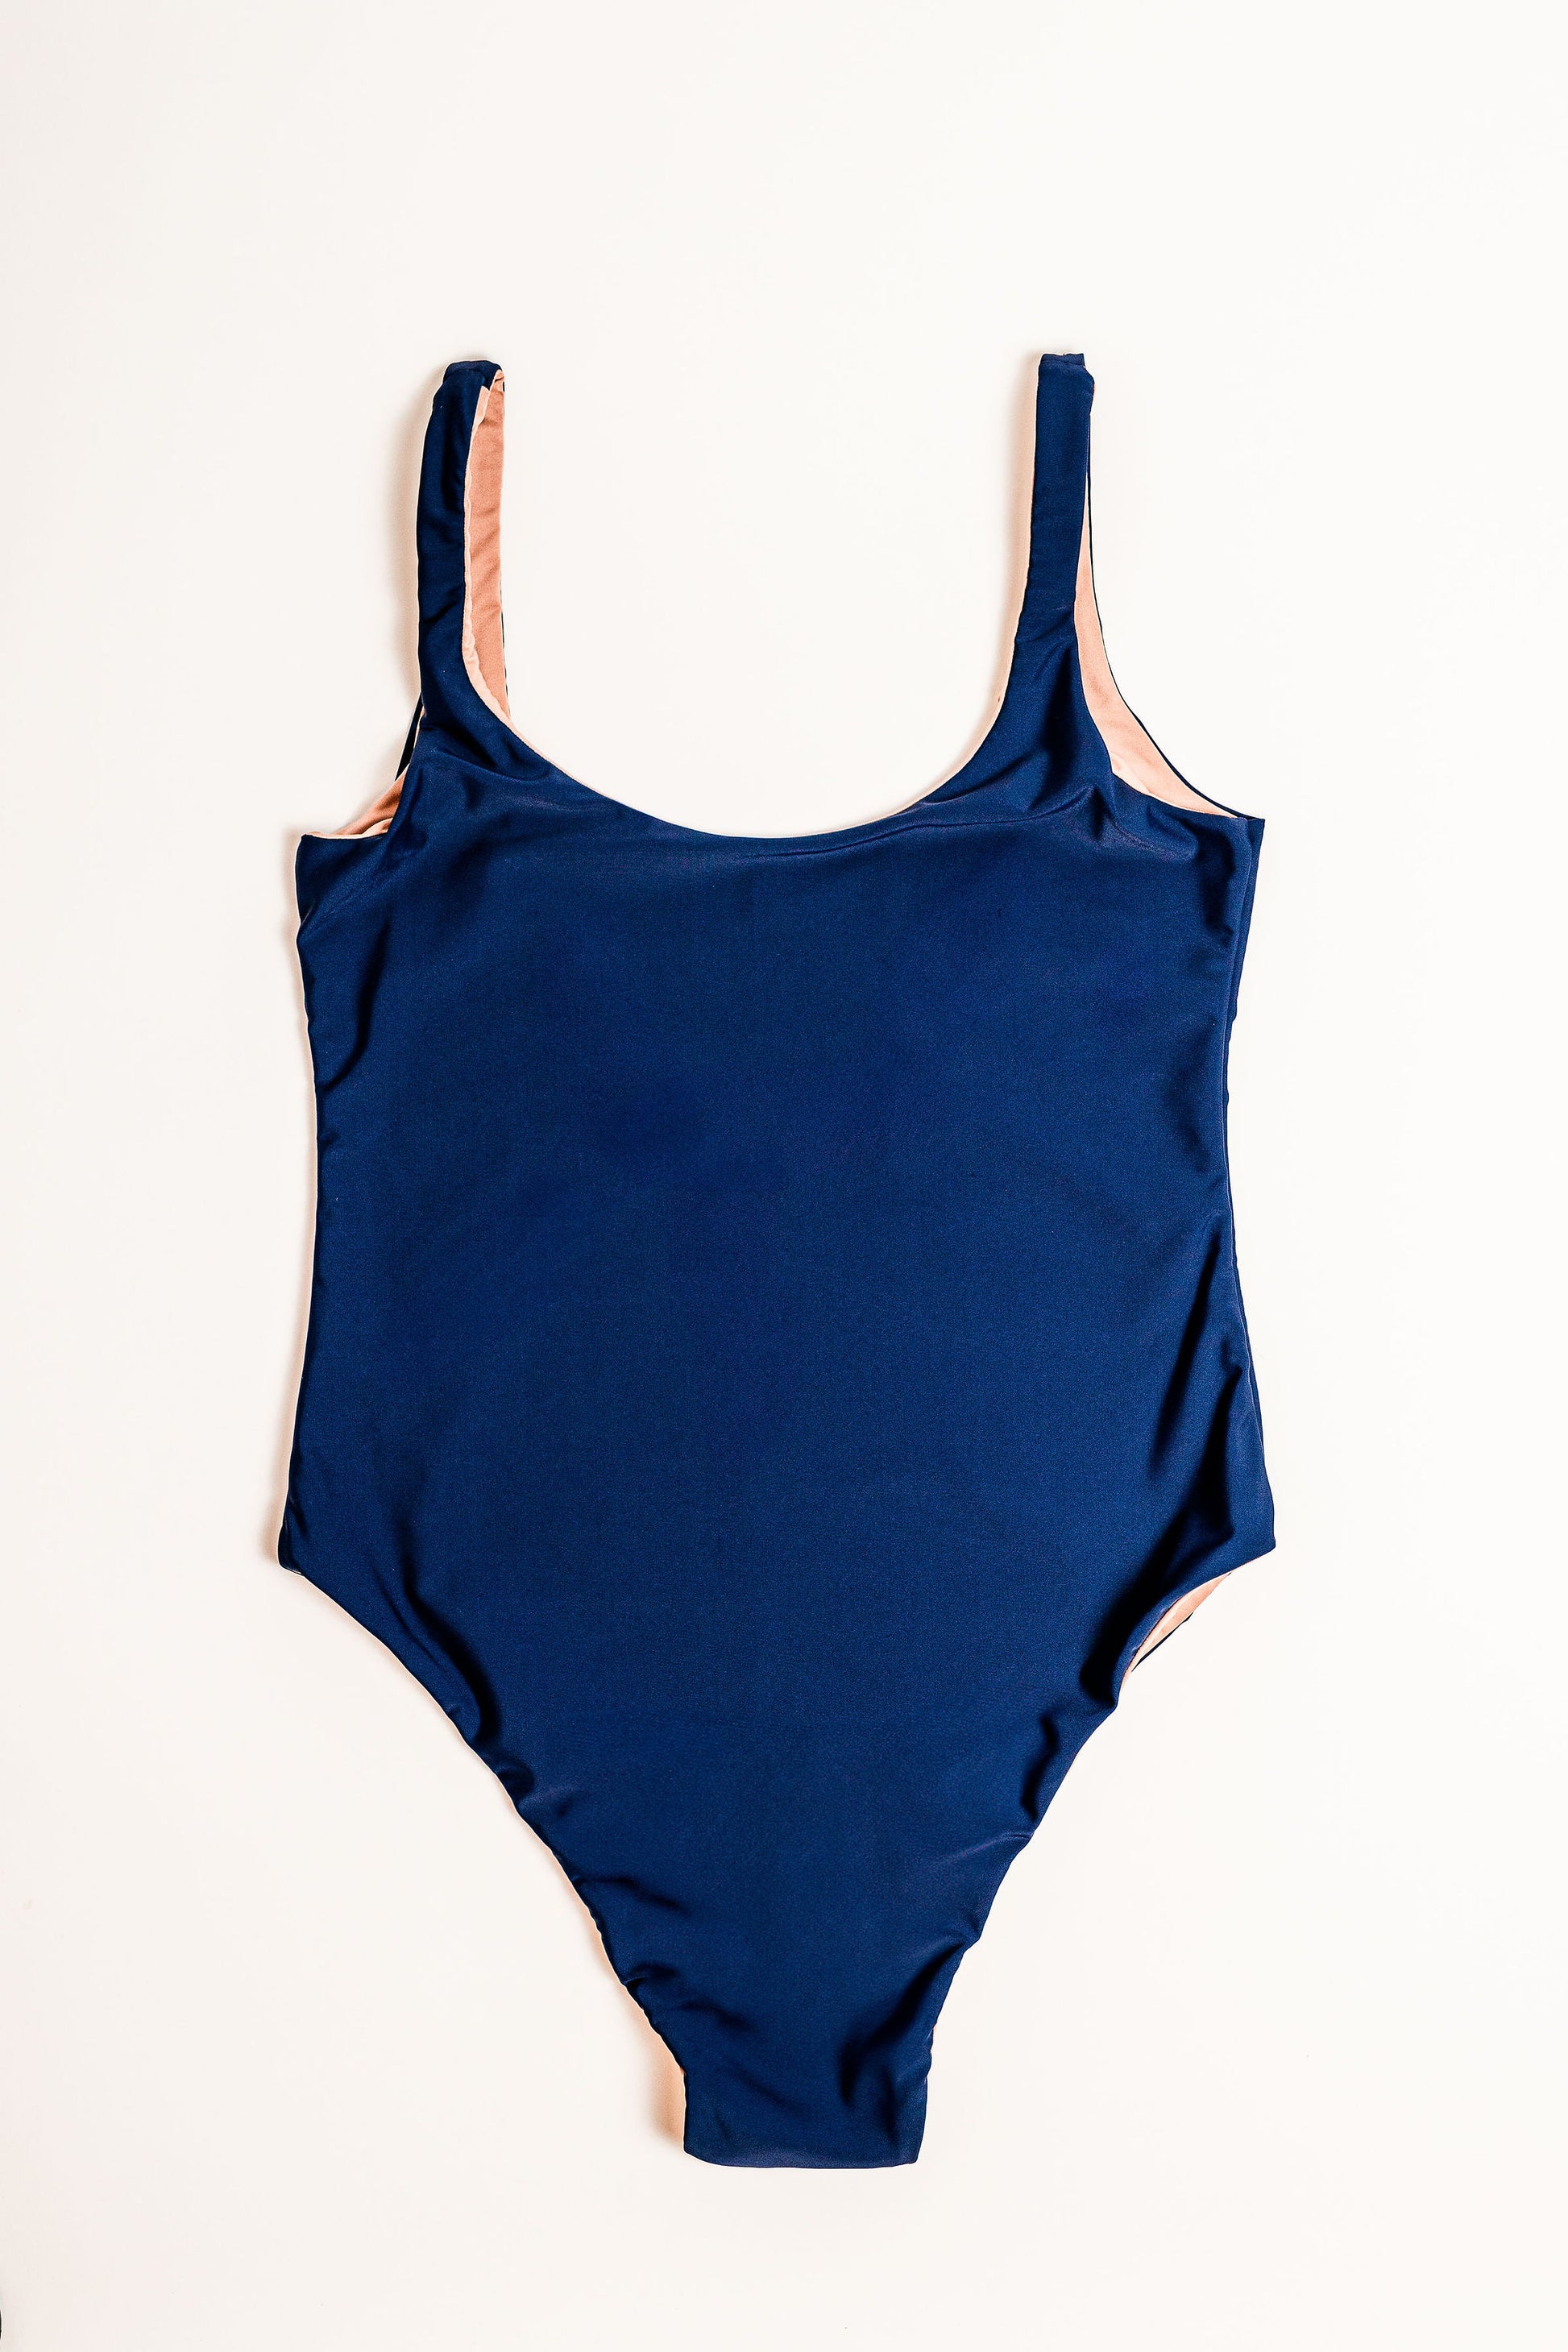 Flat lay of the Sailor Low Back One Piece in navy. Front view.